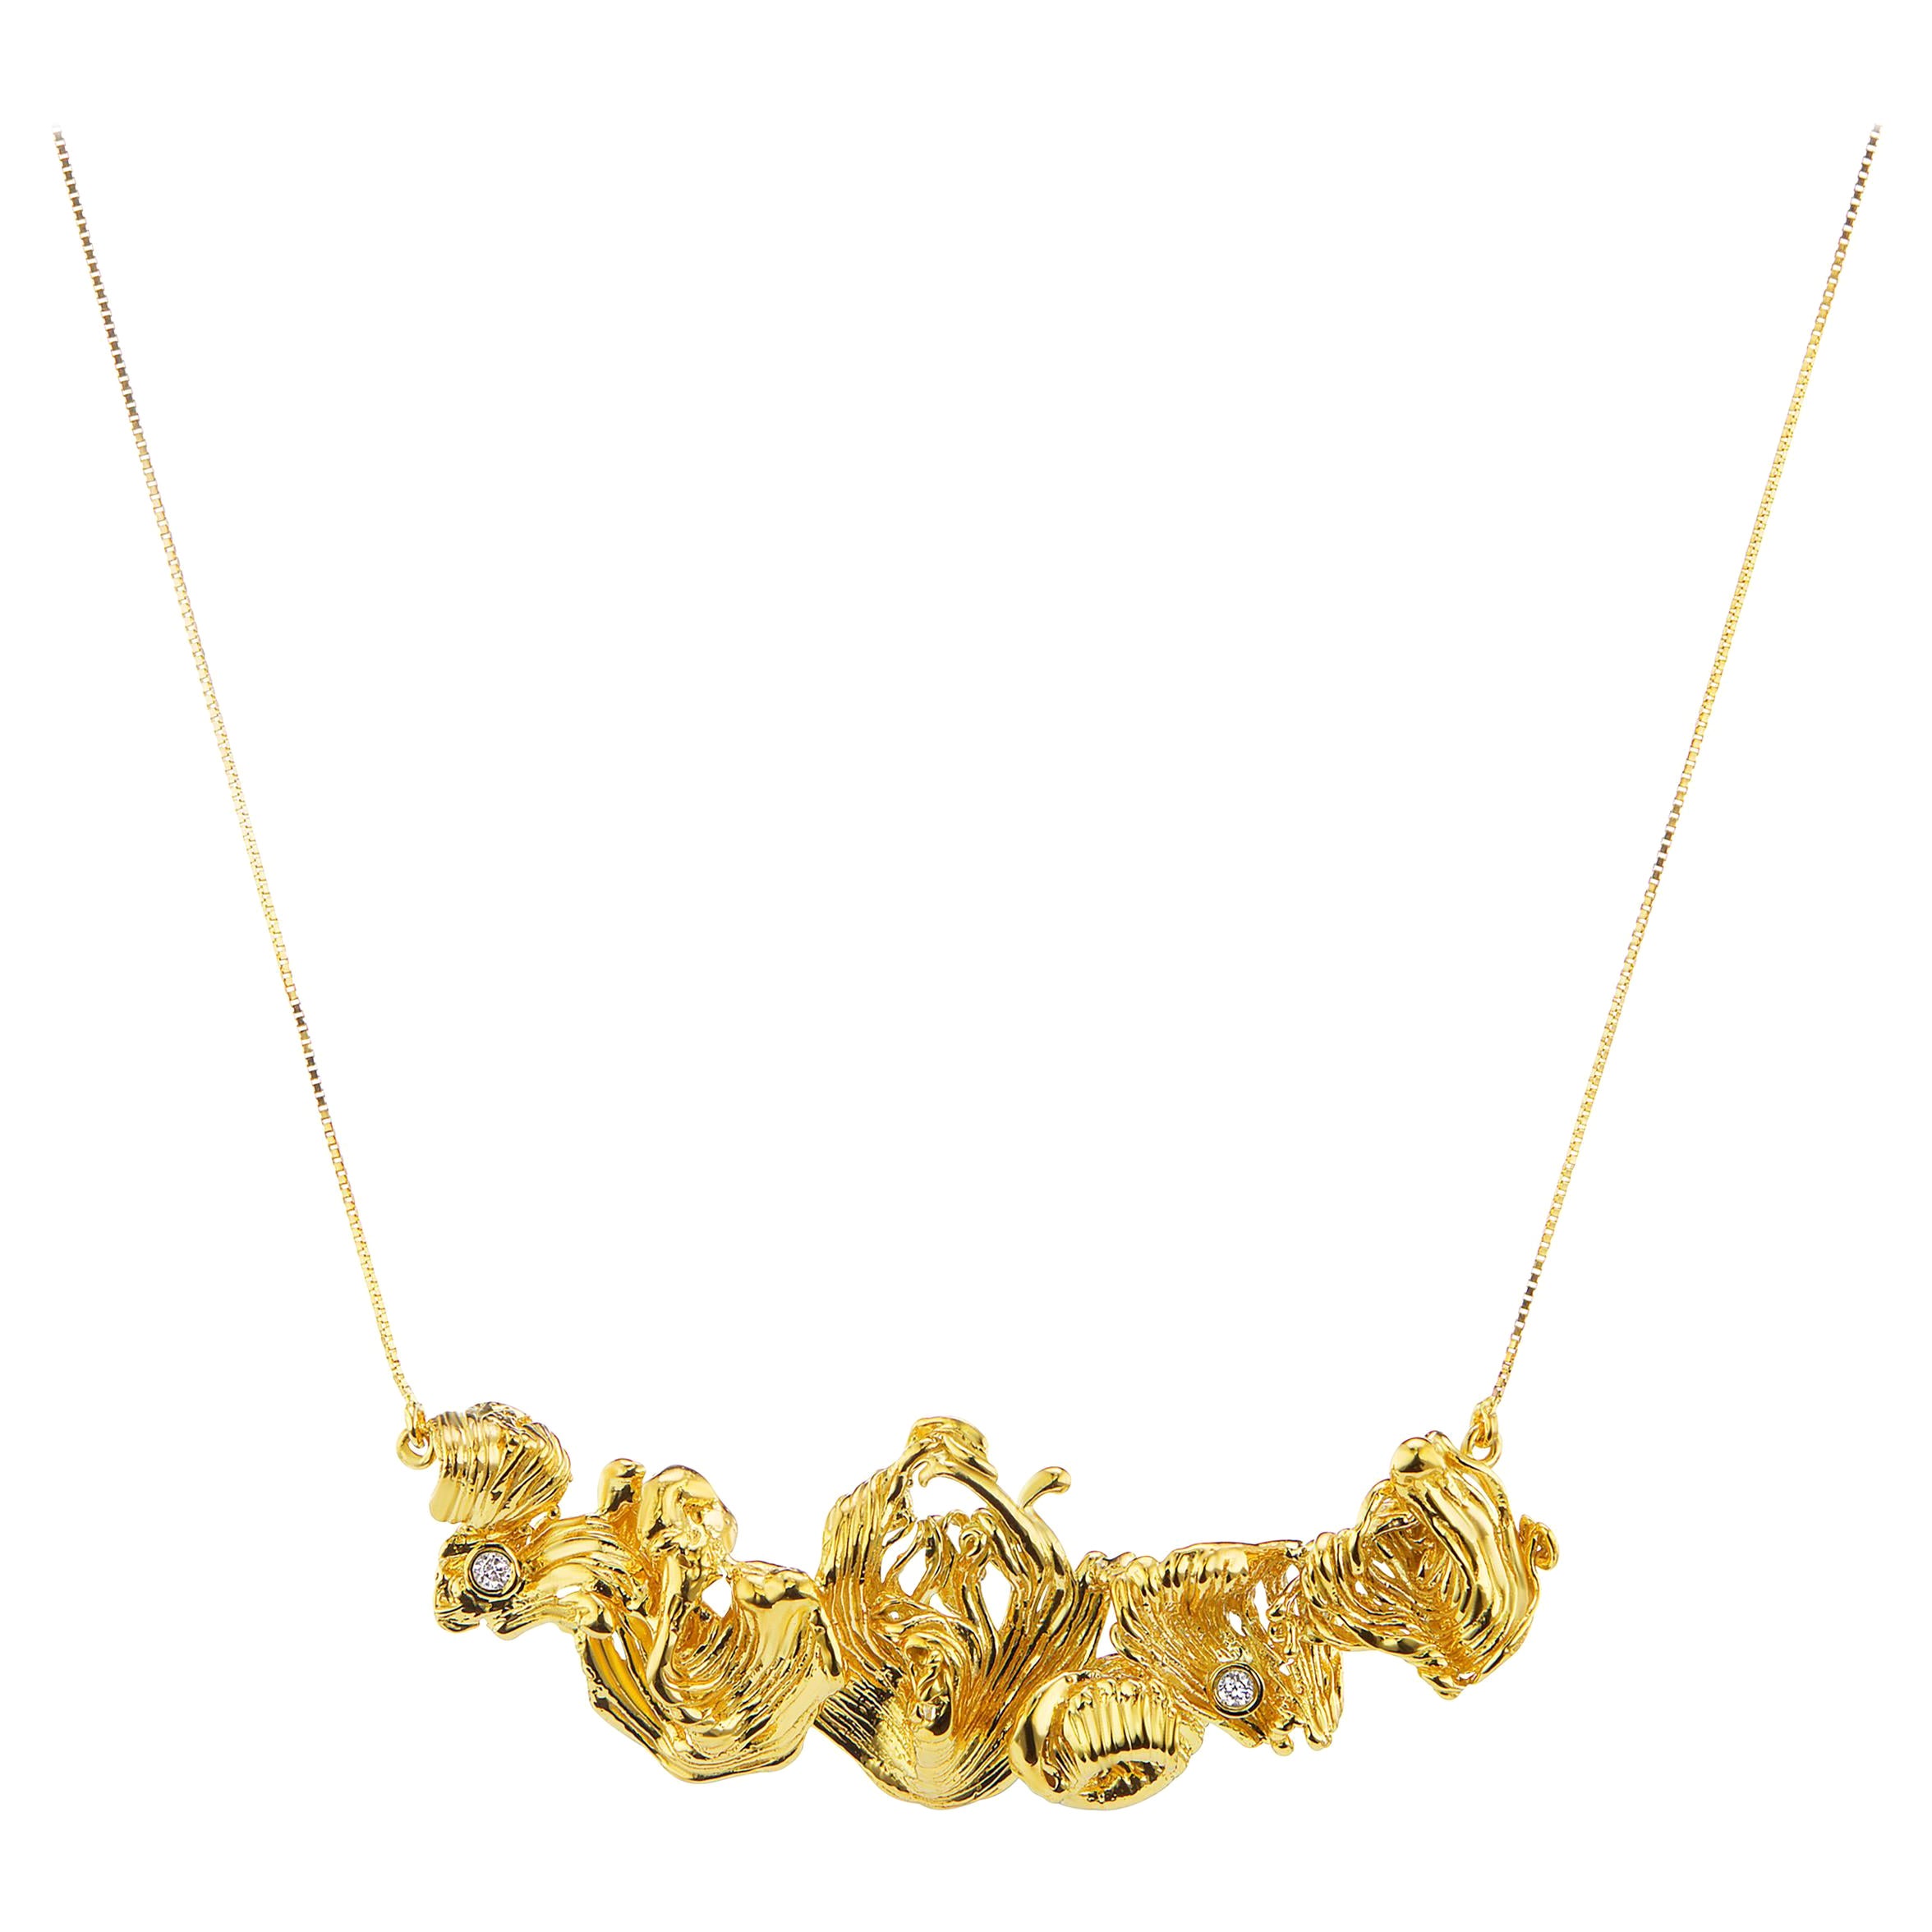 Barbosa 'T' Necklace in 18 Karat Gold and Diamond For Sale